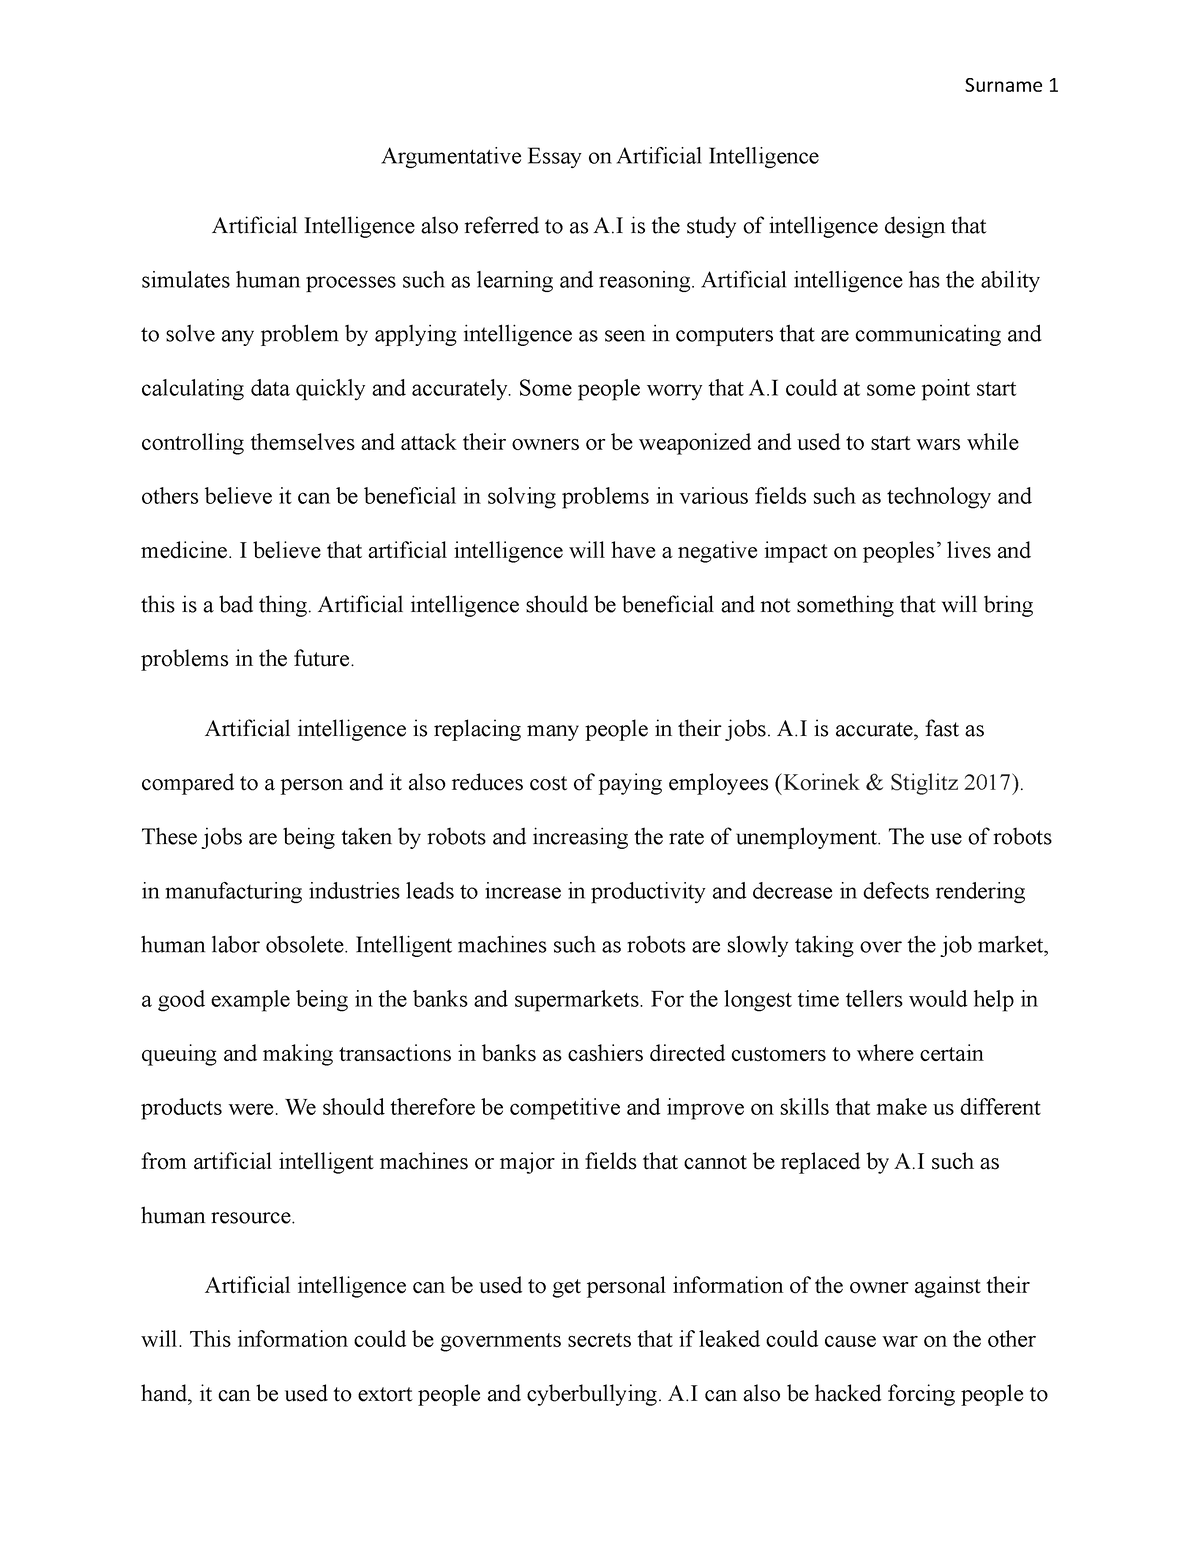 artificial intelligence topic essay